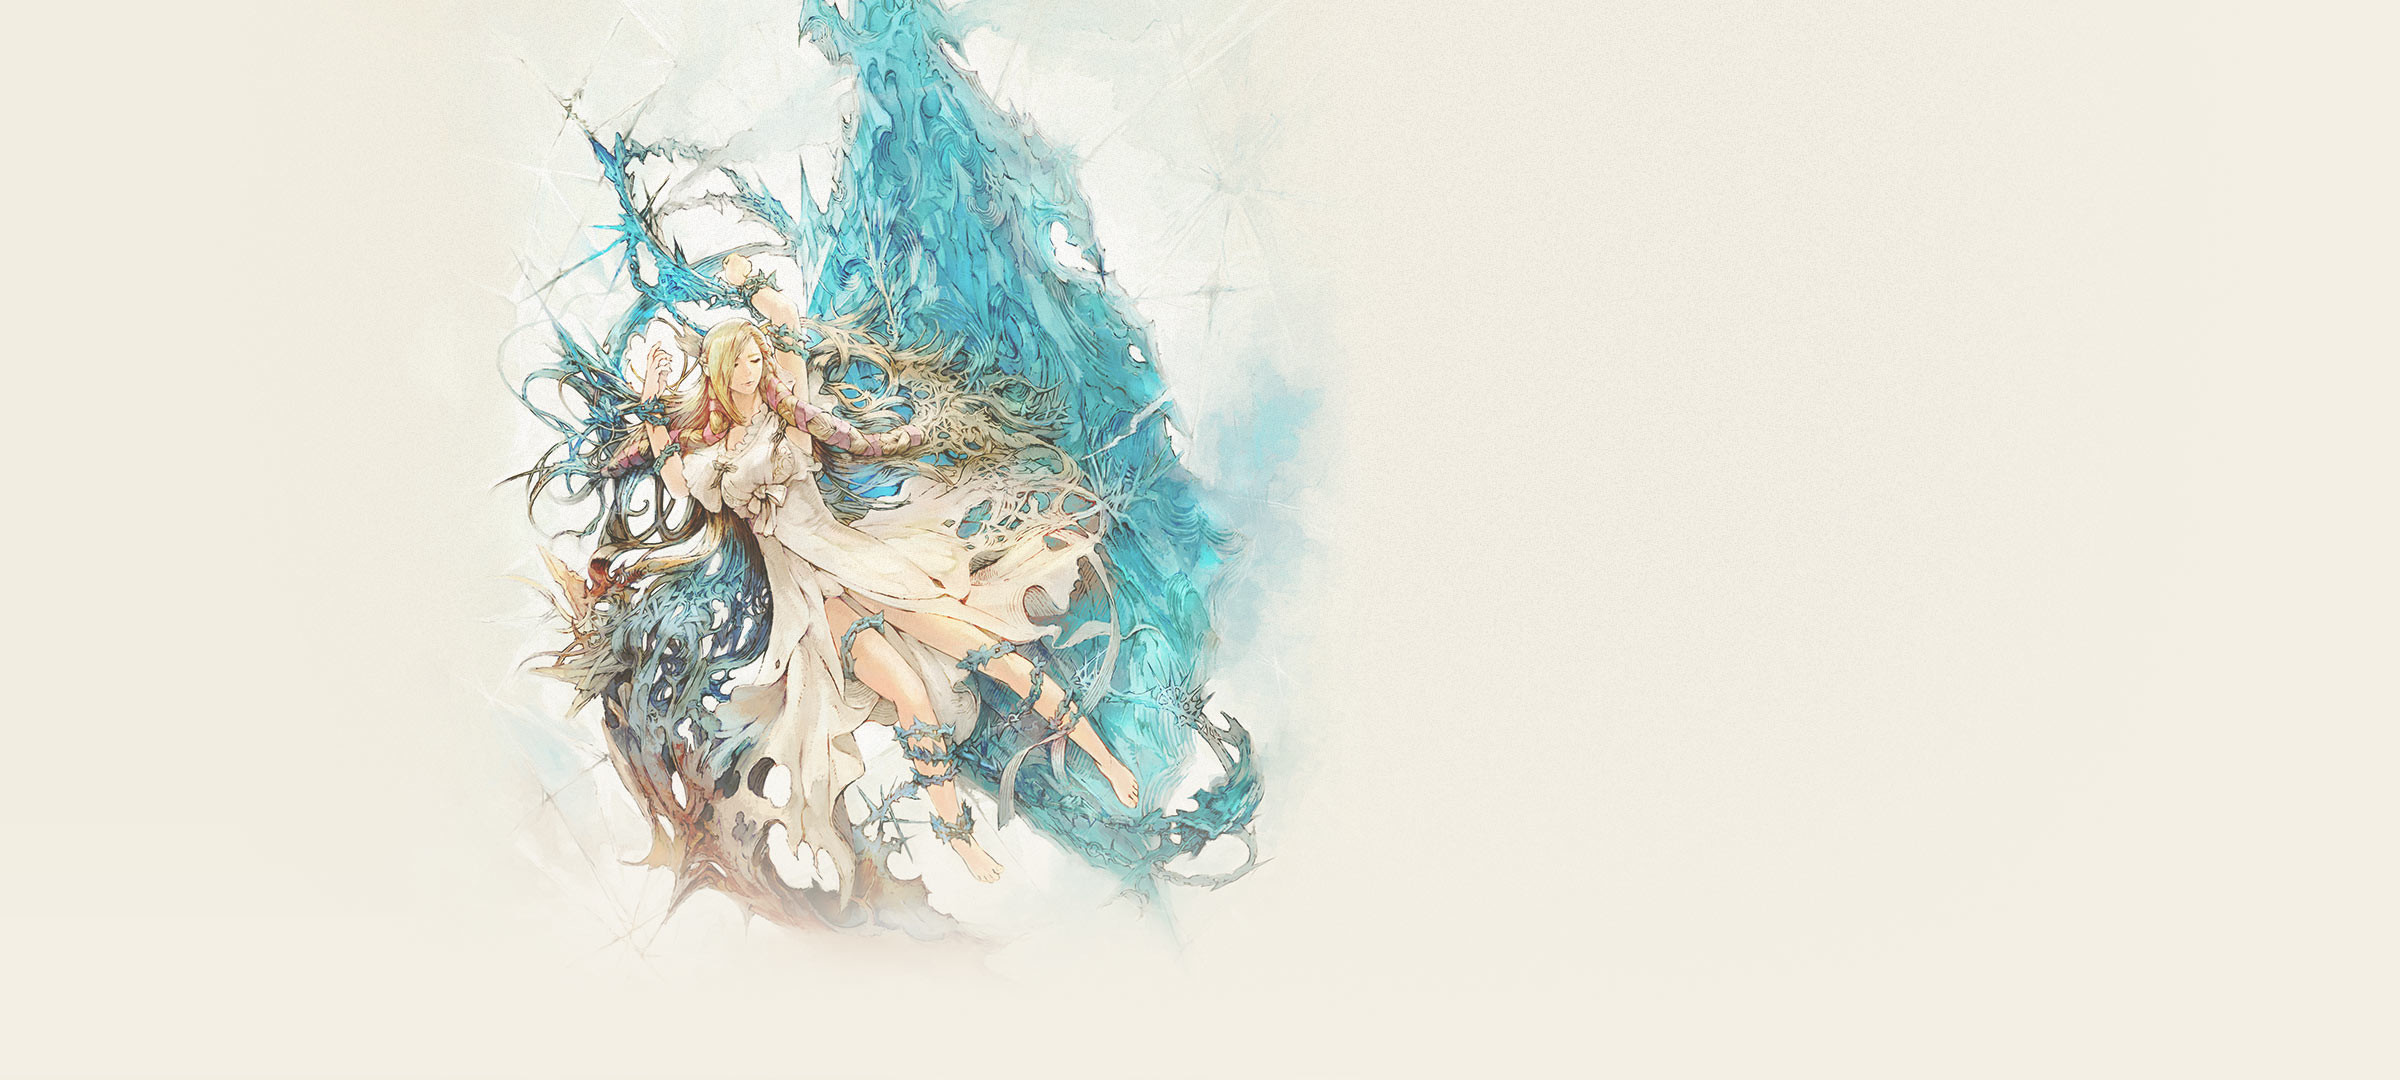 FINAL FANTASY XIV Patch 3.2 – The Gears of Change